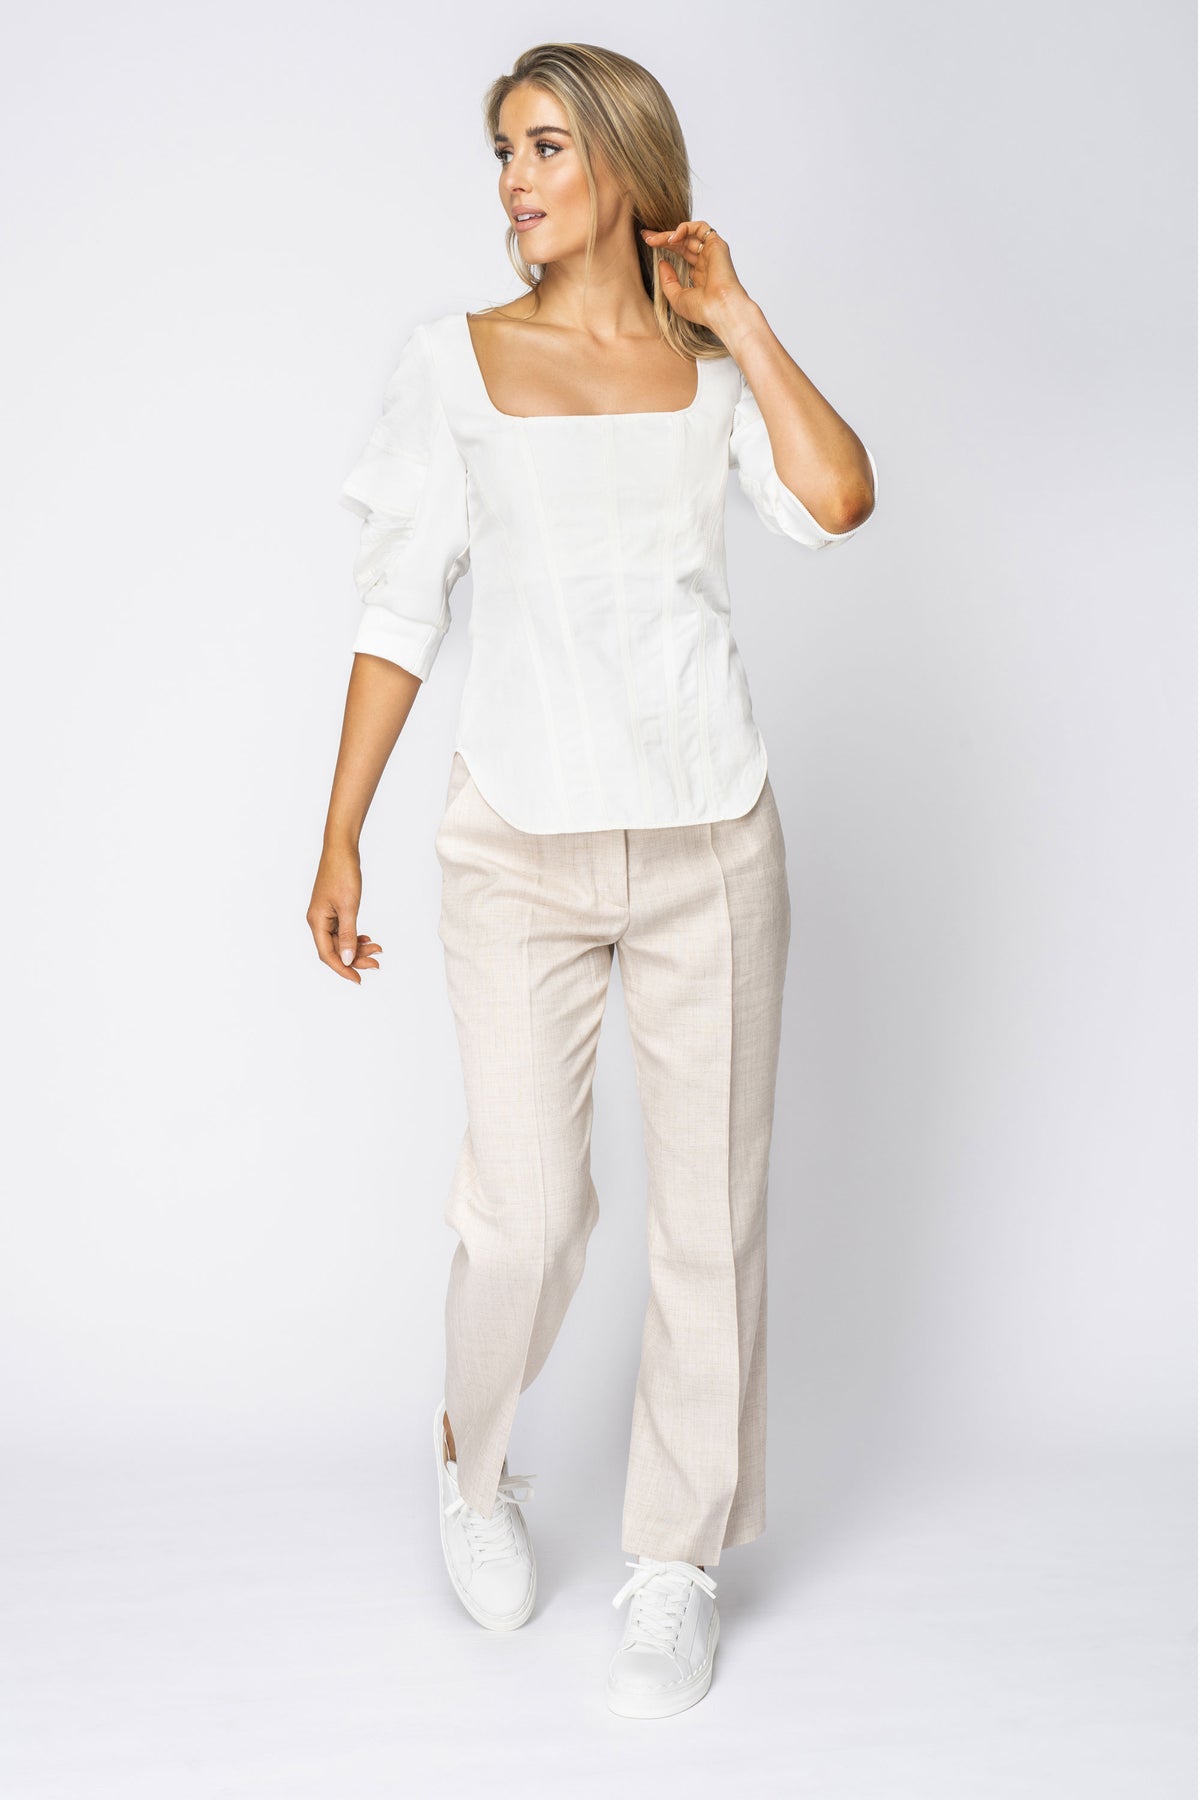 Stella McCartney Cream Square Neck Top With Puffy Sleeve